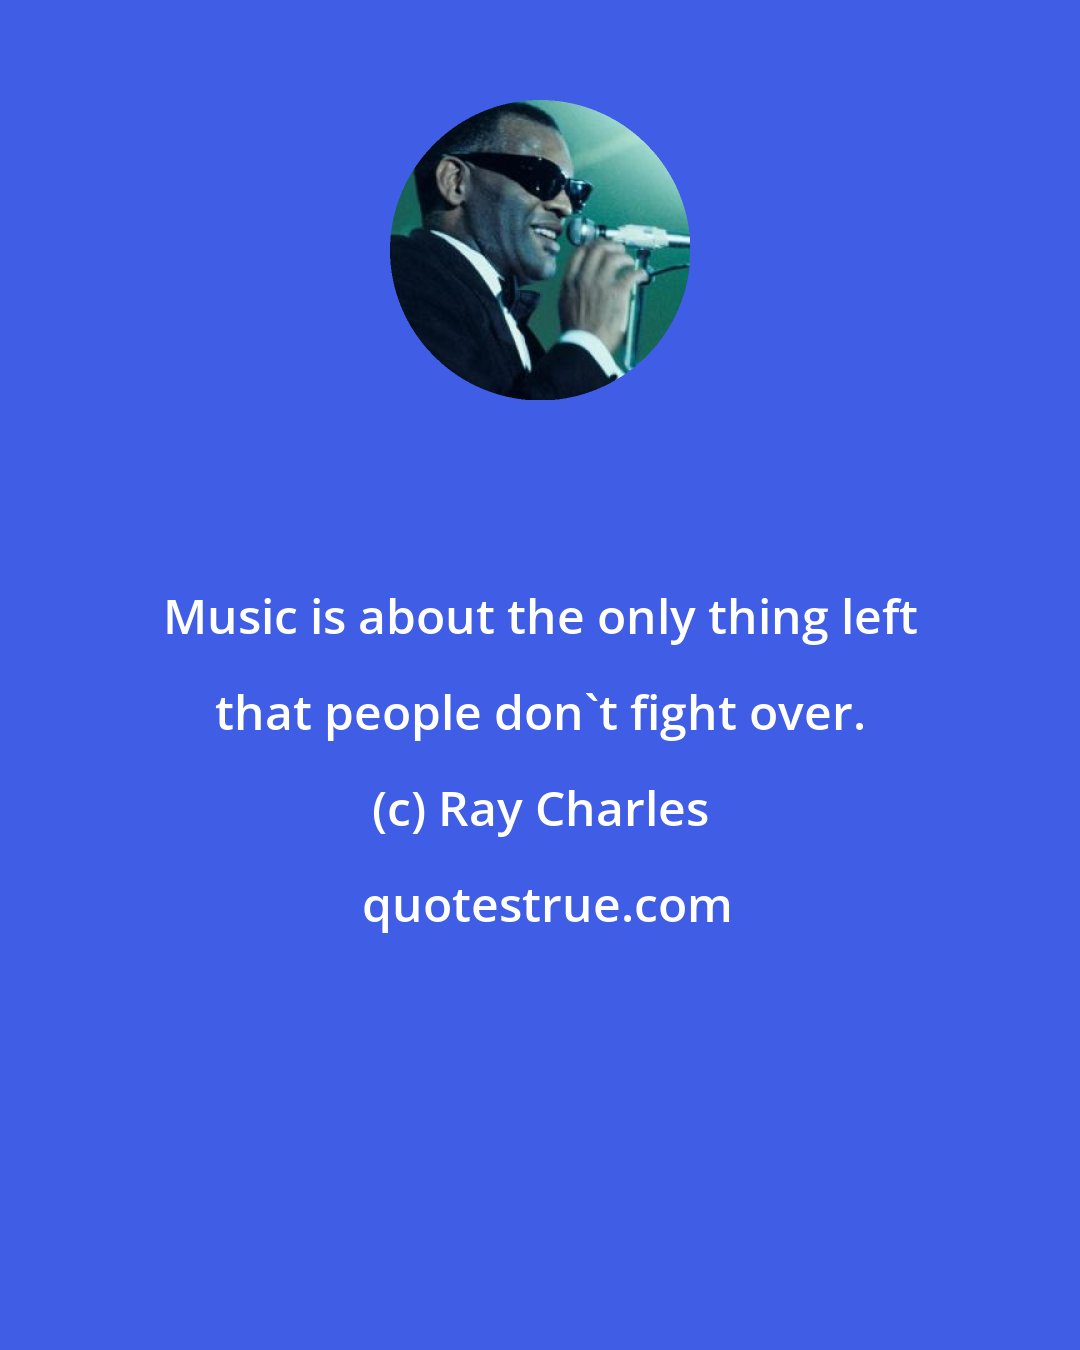 Ray Charles: Music is about the only thing left that people don't fight over.